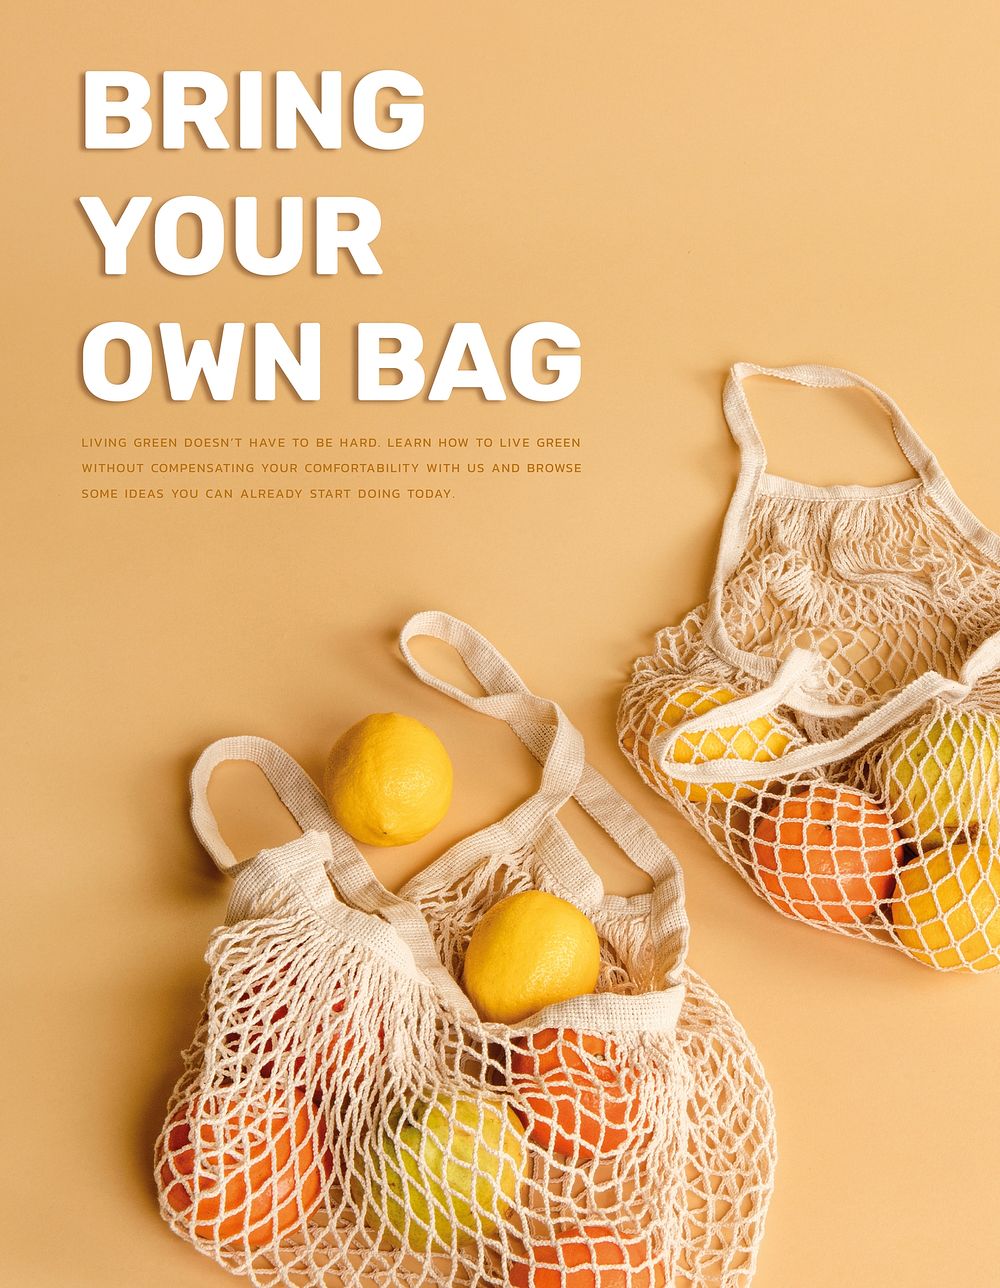 Bring your own bag, change to a green lifestyle